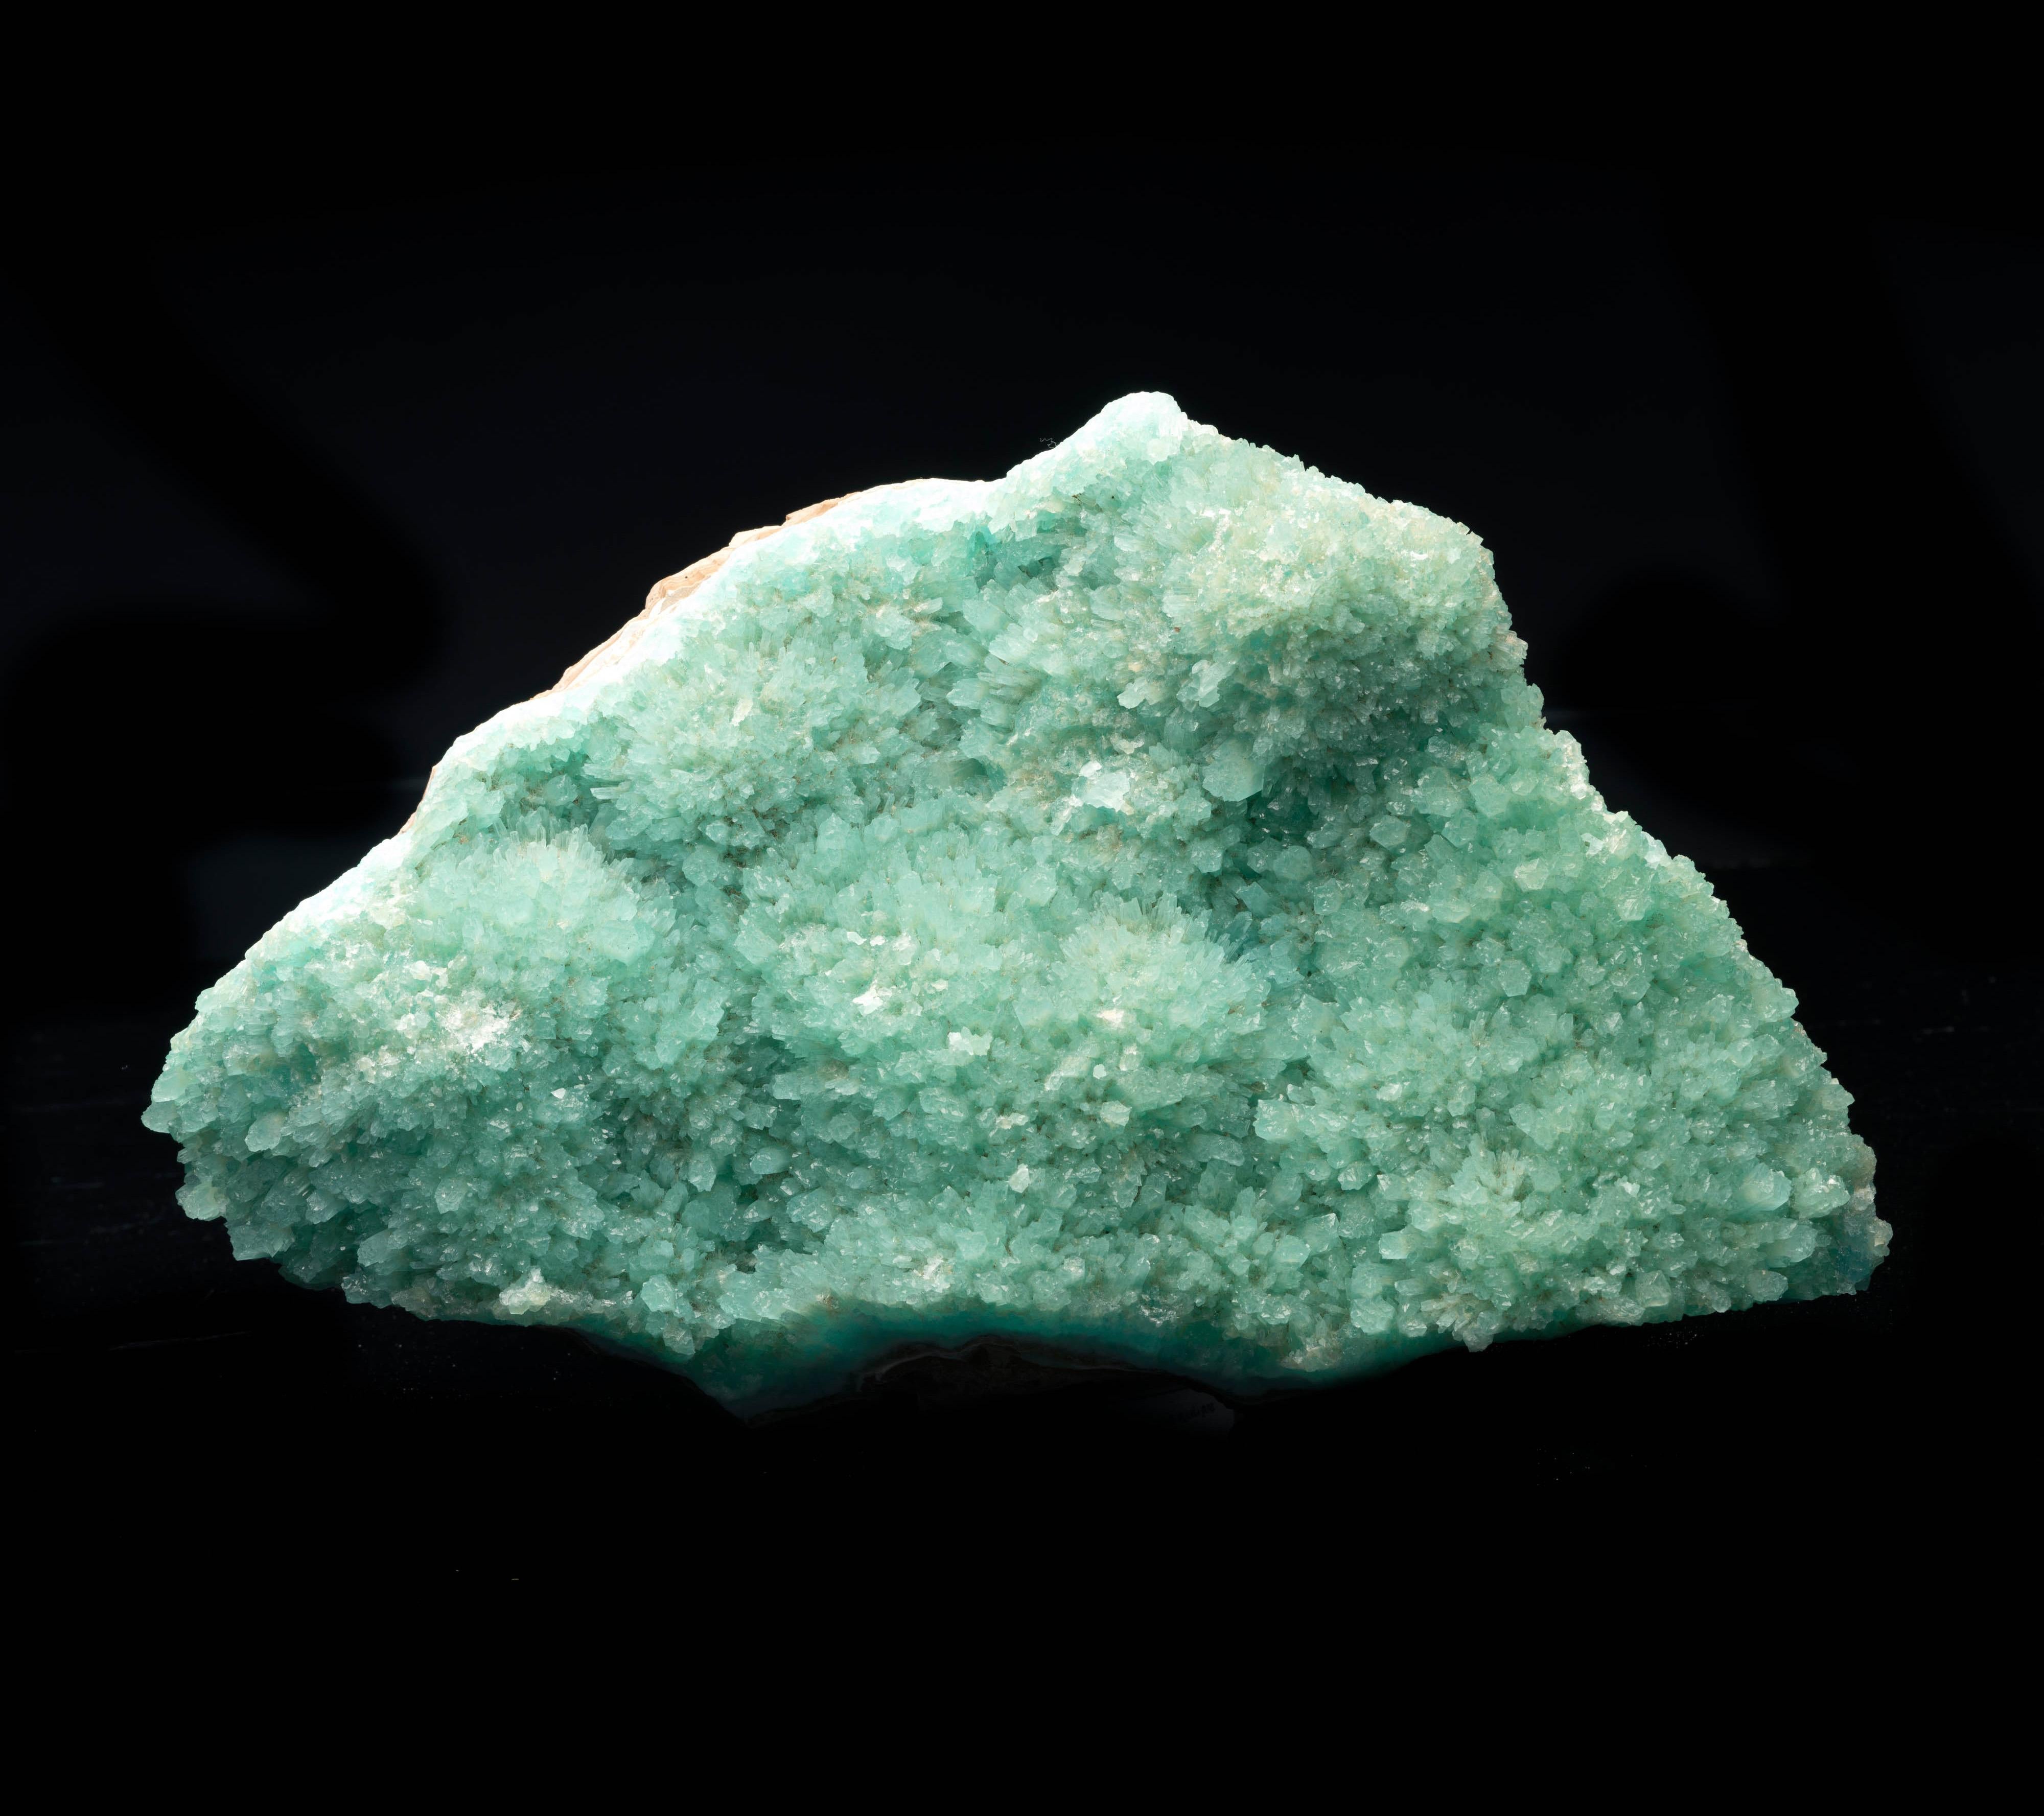 The crystallized blue form of the calcium carbonate mineral aragonite is very sought-after. This substantial piece features gorgeous teal blue color and great luster and crystallization. This specimen comes from a pocket recently discovered in